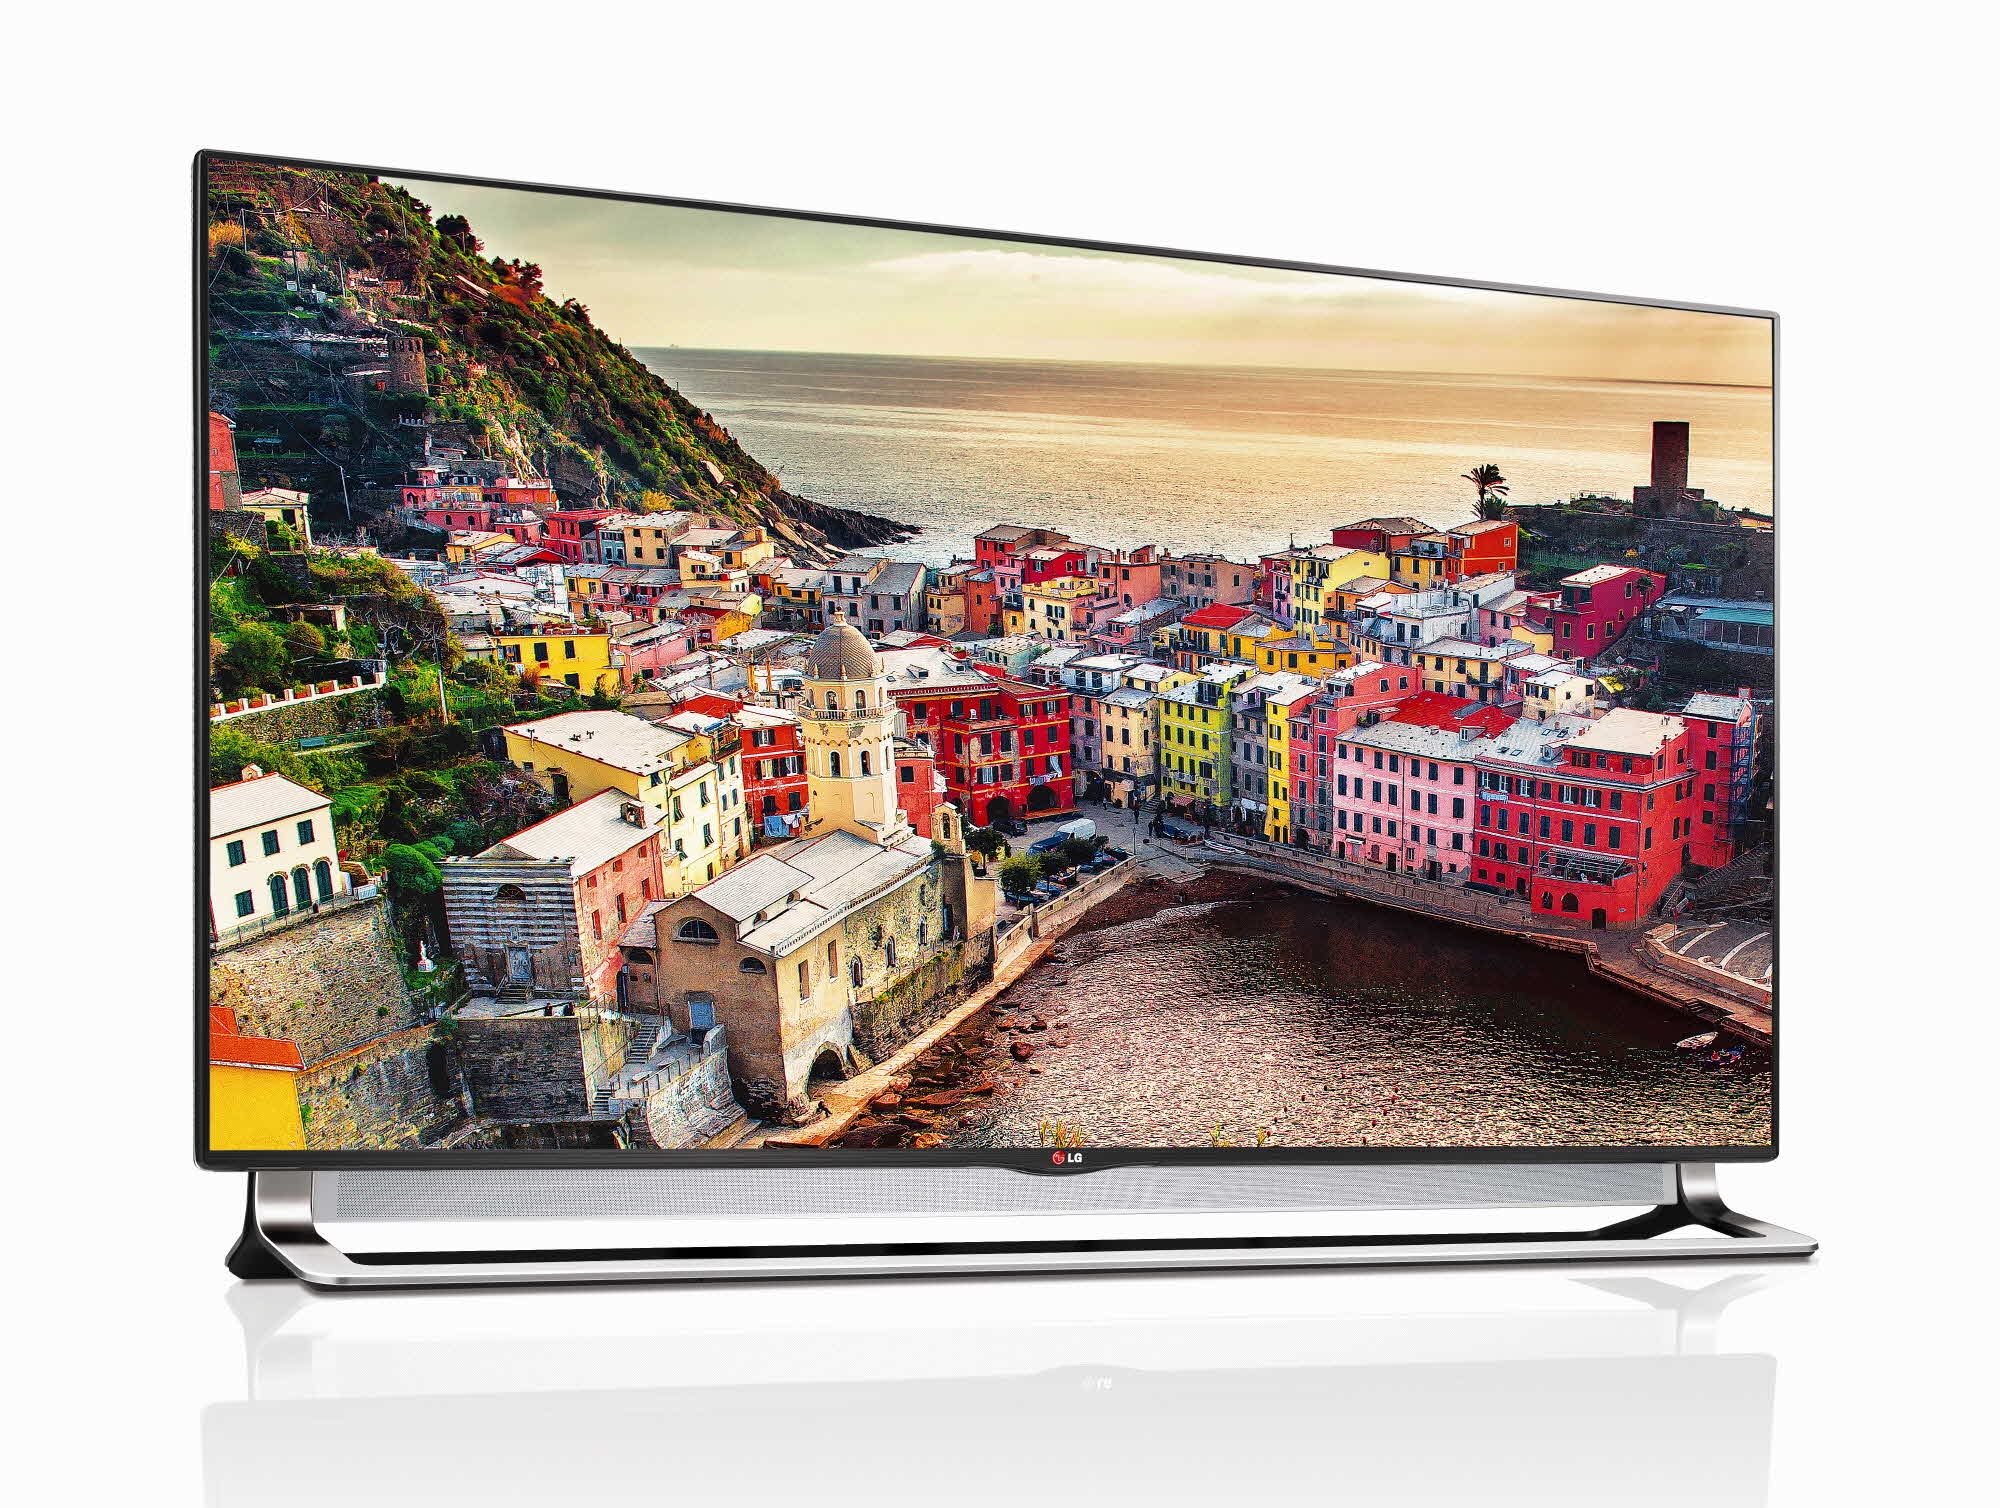 Front view of LG ULTRA HDTV model LA9700 displaying a colorful town by the sea